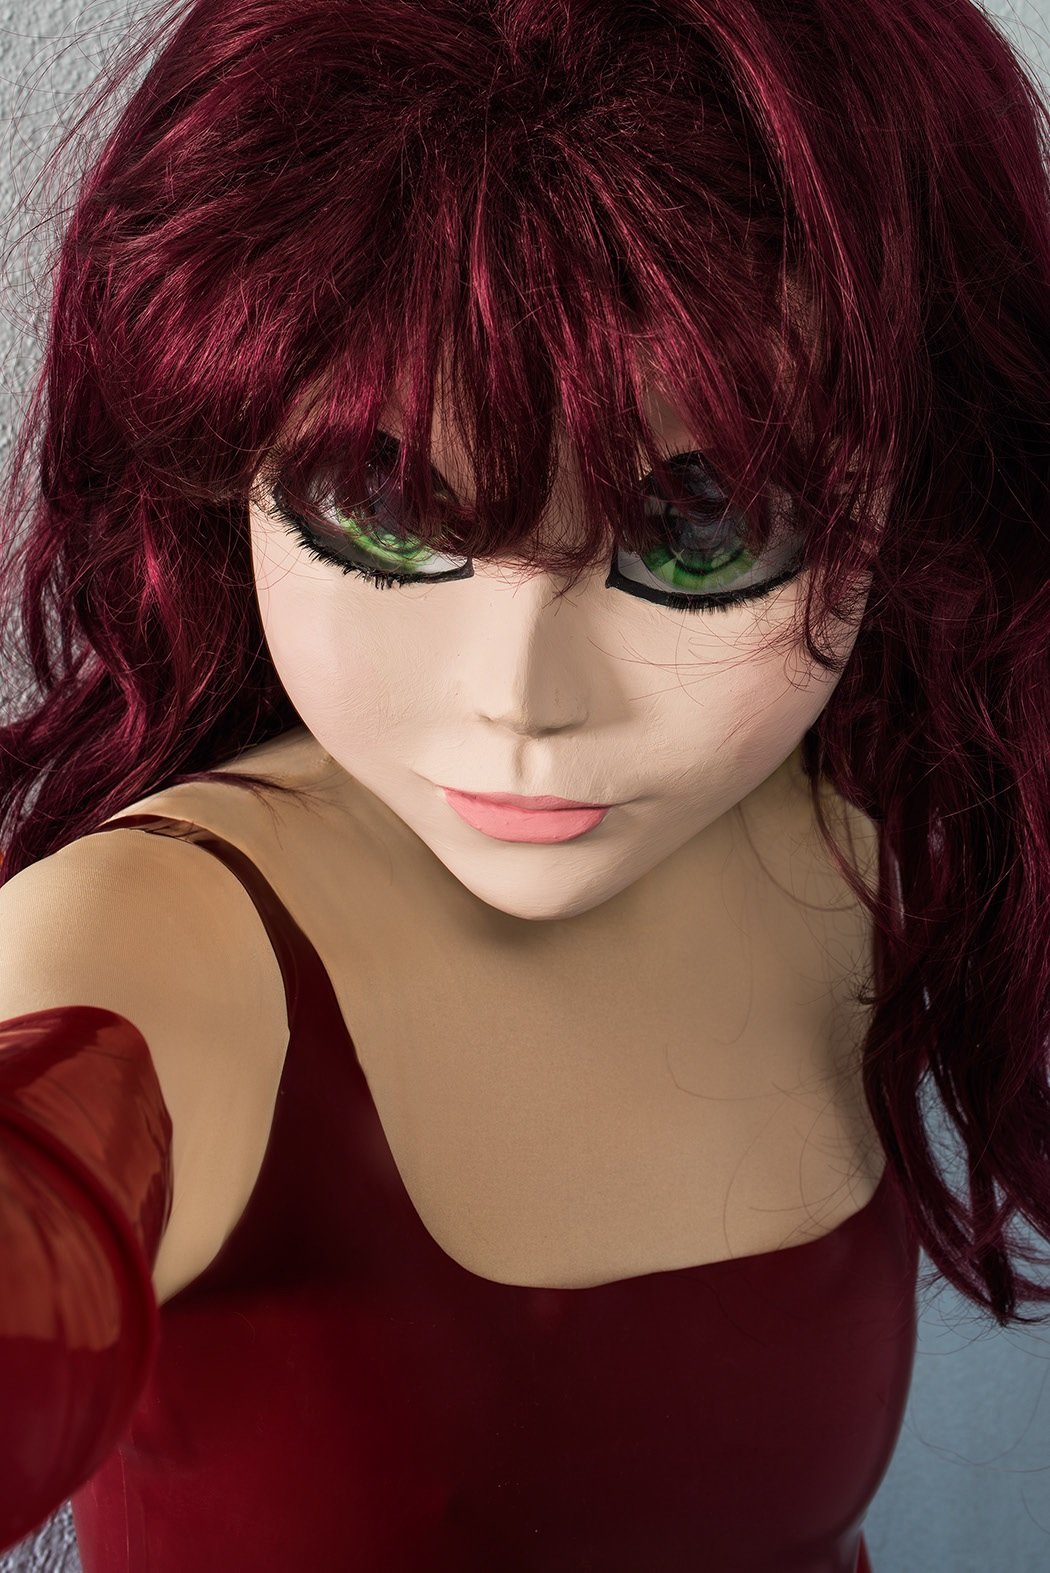 Laurie Simmons Redhead/Red Dress/Selfie, 2014 20 x 28.75 inches 50.80 x 73 centimeters